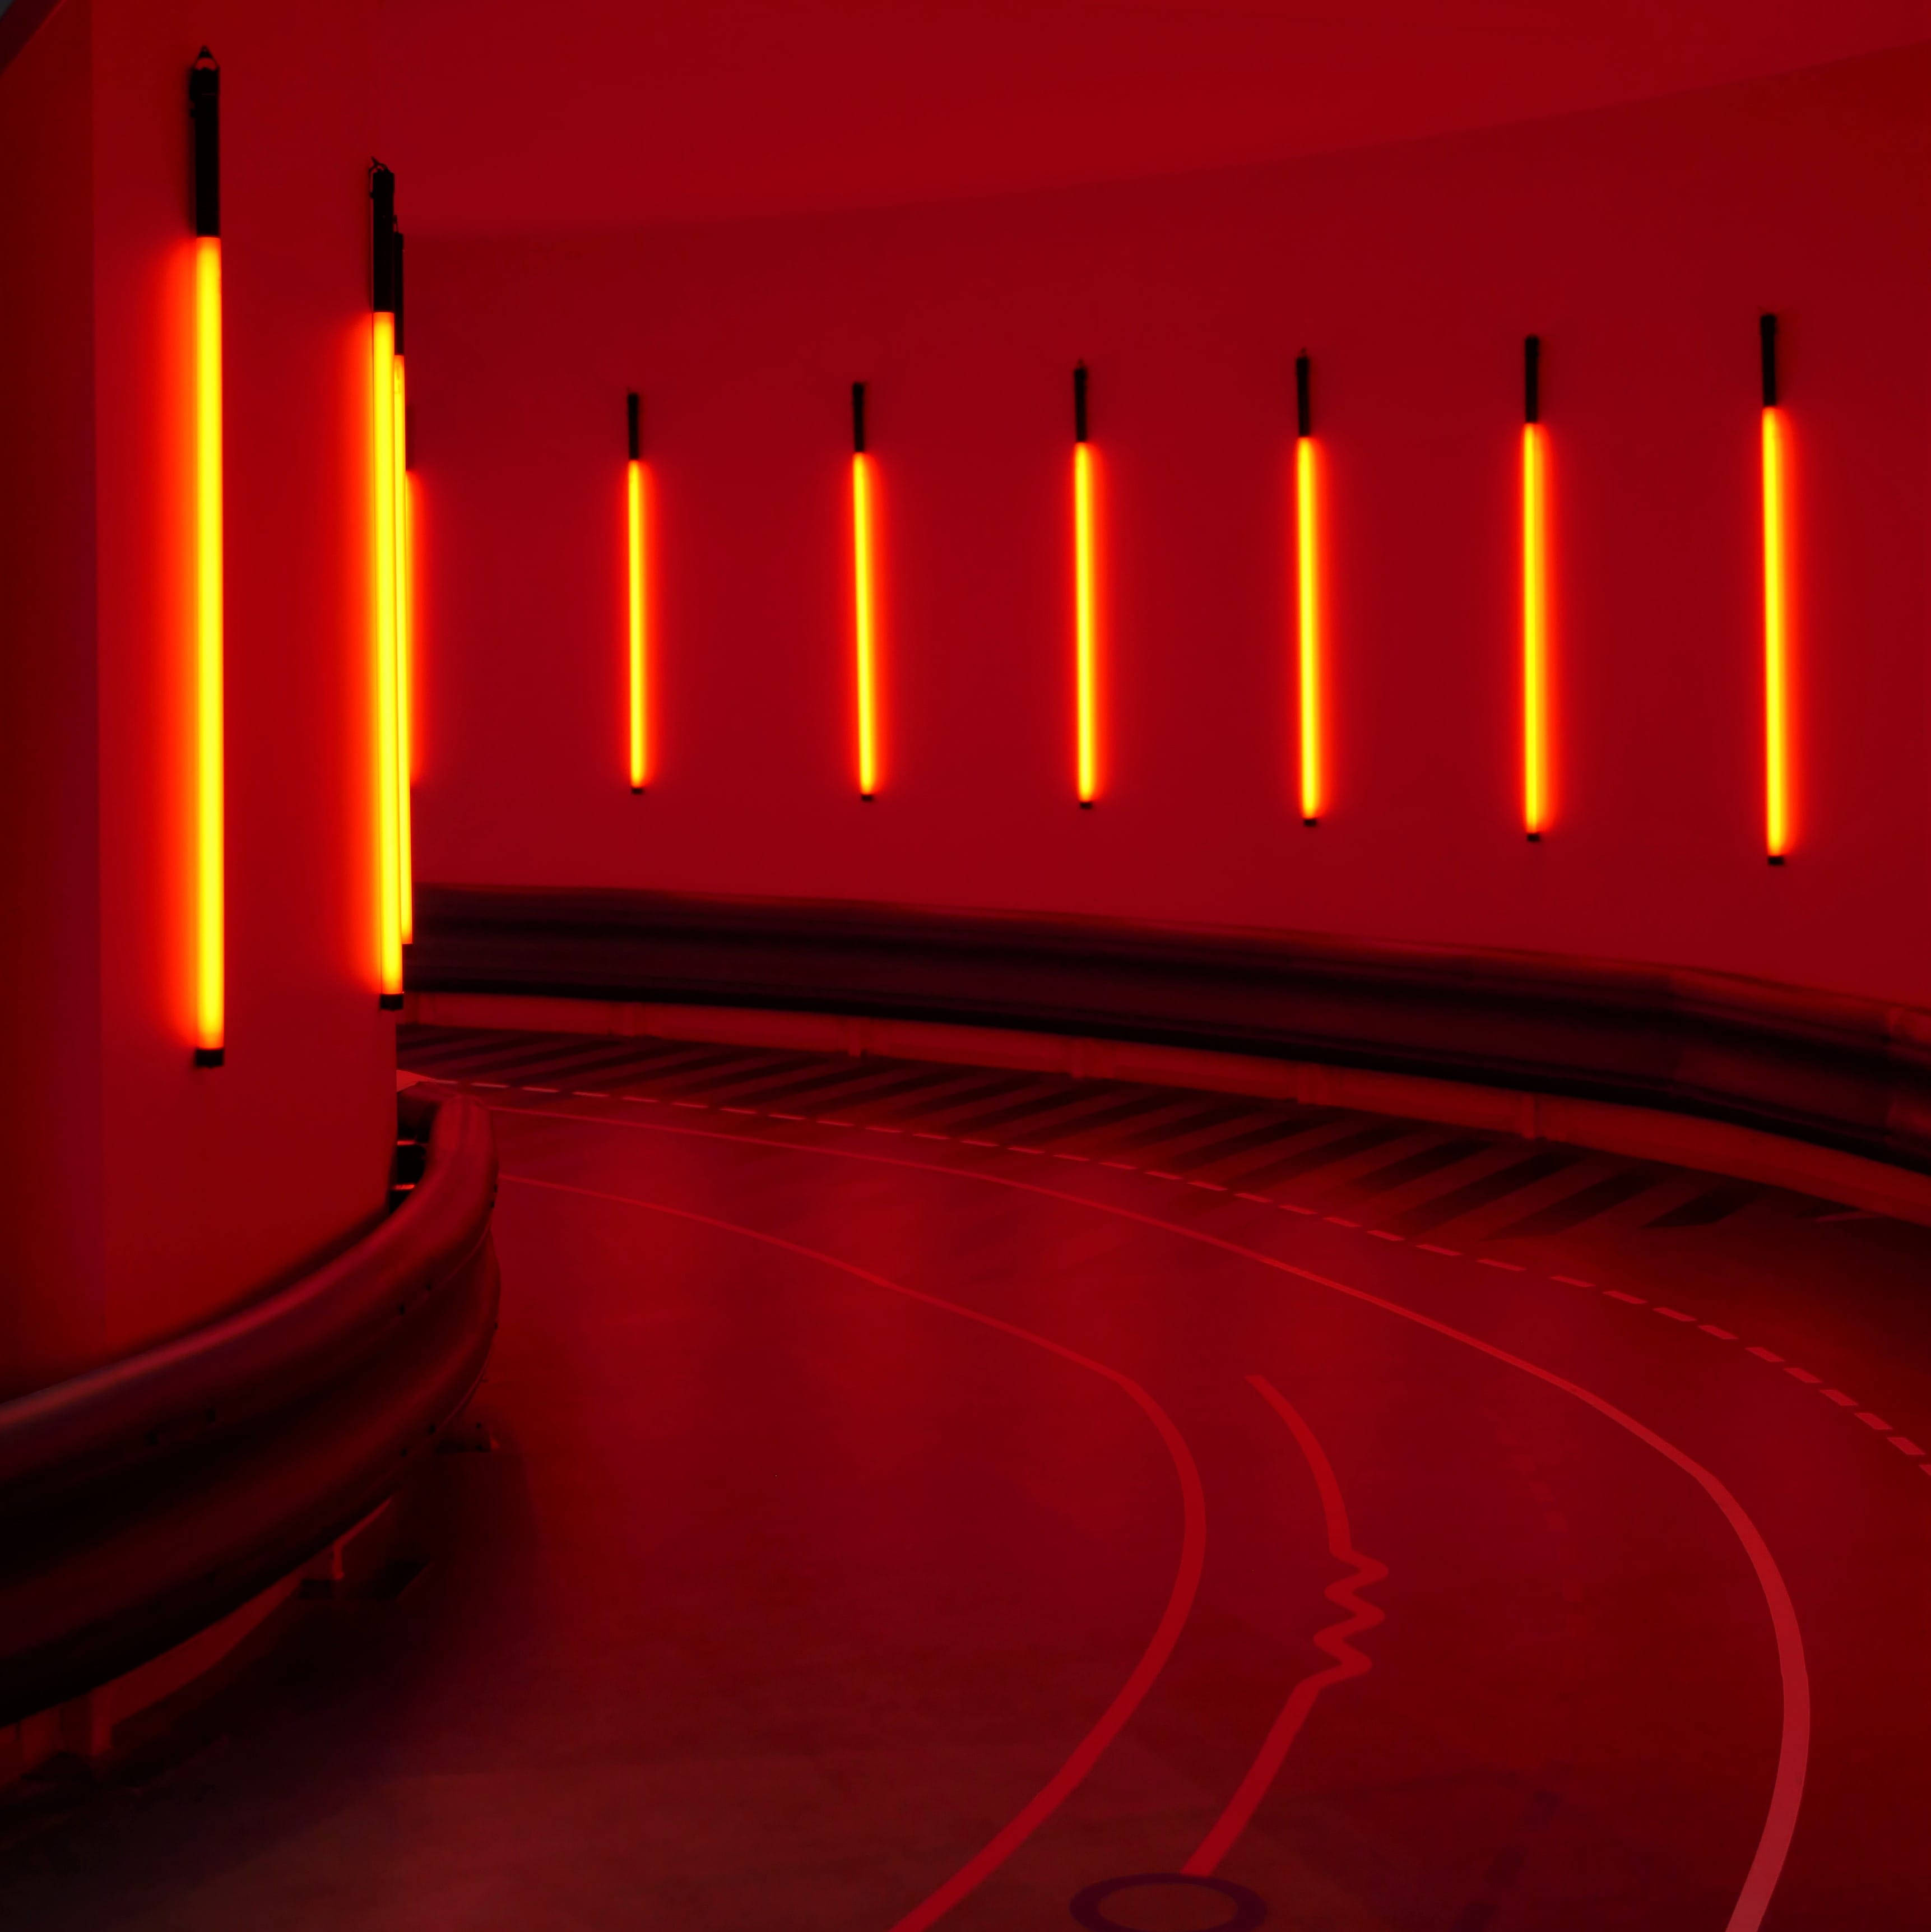 A red room with many lights on the wall - Neon orange